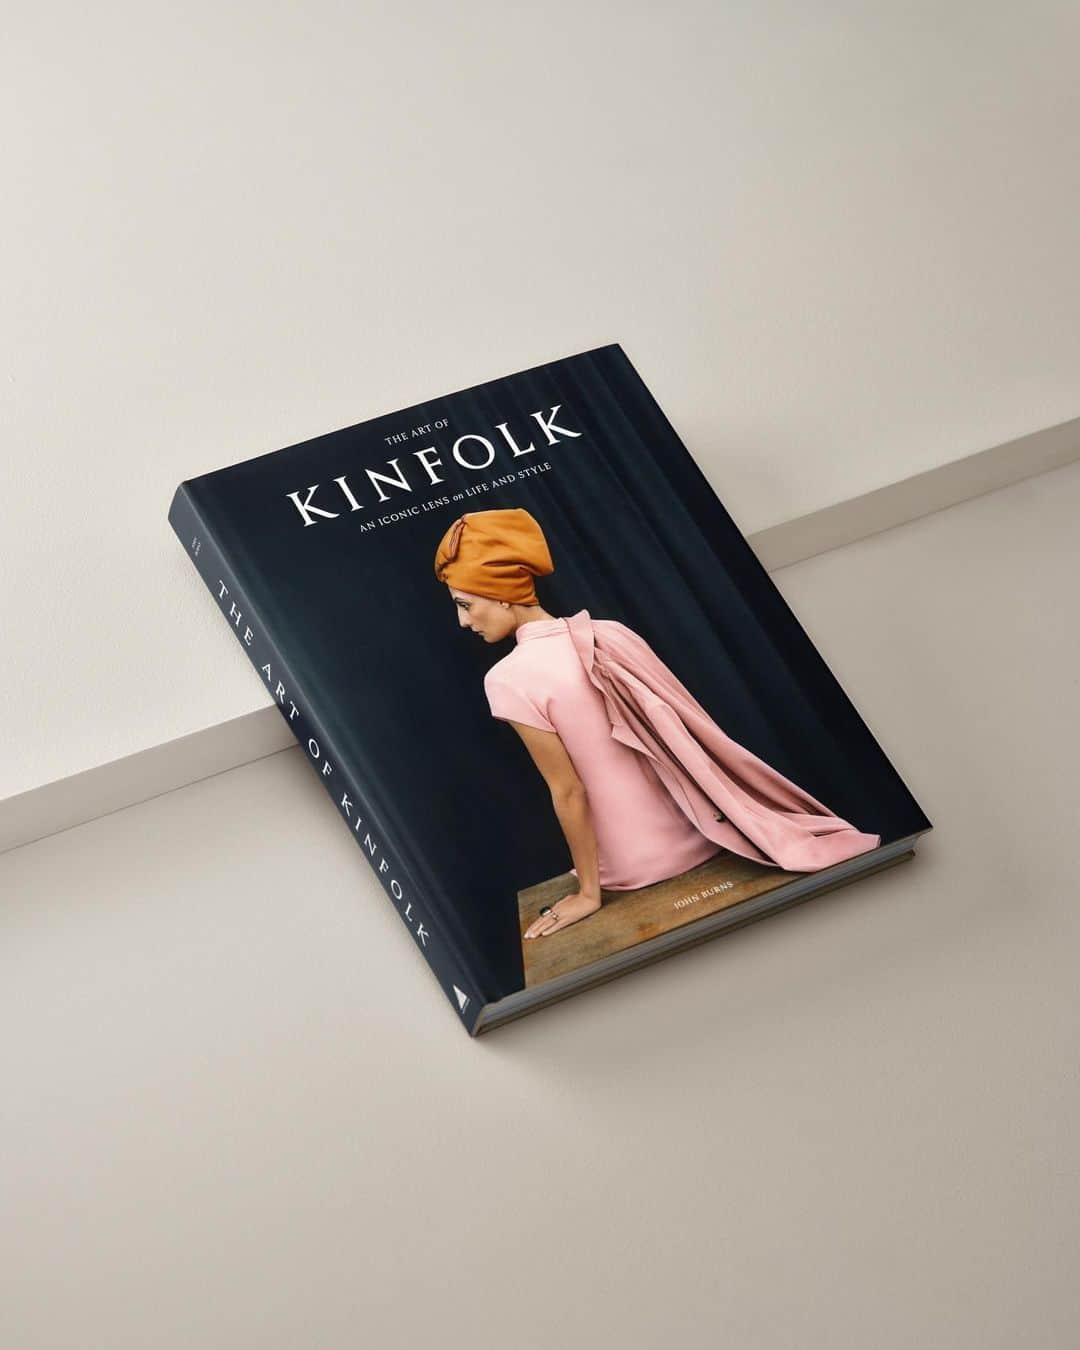 Kinfolk Magazineのインスタグラム：「It’s here! The Art of Kinfolk is now available worldwide ✨💙 This very special book is a labor of love, bringing over 300 of the most inspiring photographs we’ve ever published together in one compelling curation that spans home interiors, fashion, portraiture, food and travel. While our magazine has evolved during our decade in print, one defining characteristic remains constant: a dedication to publishing only the most exquisite photography. The Art of Kinfolk represents the very best of our archives. Order your copy on Kinfolk.com  (Cover photo: @danilo.scarpati, Photo: @saragosas)」